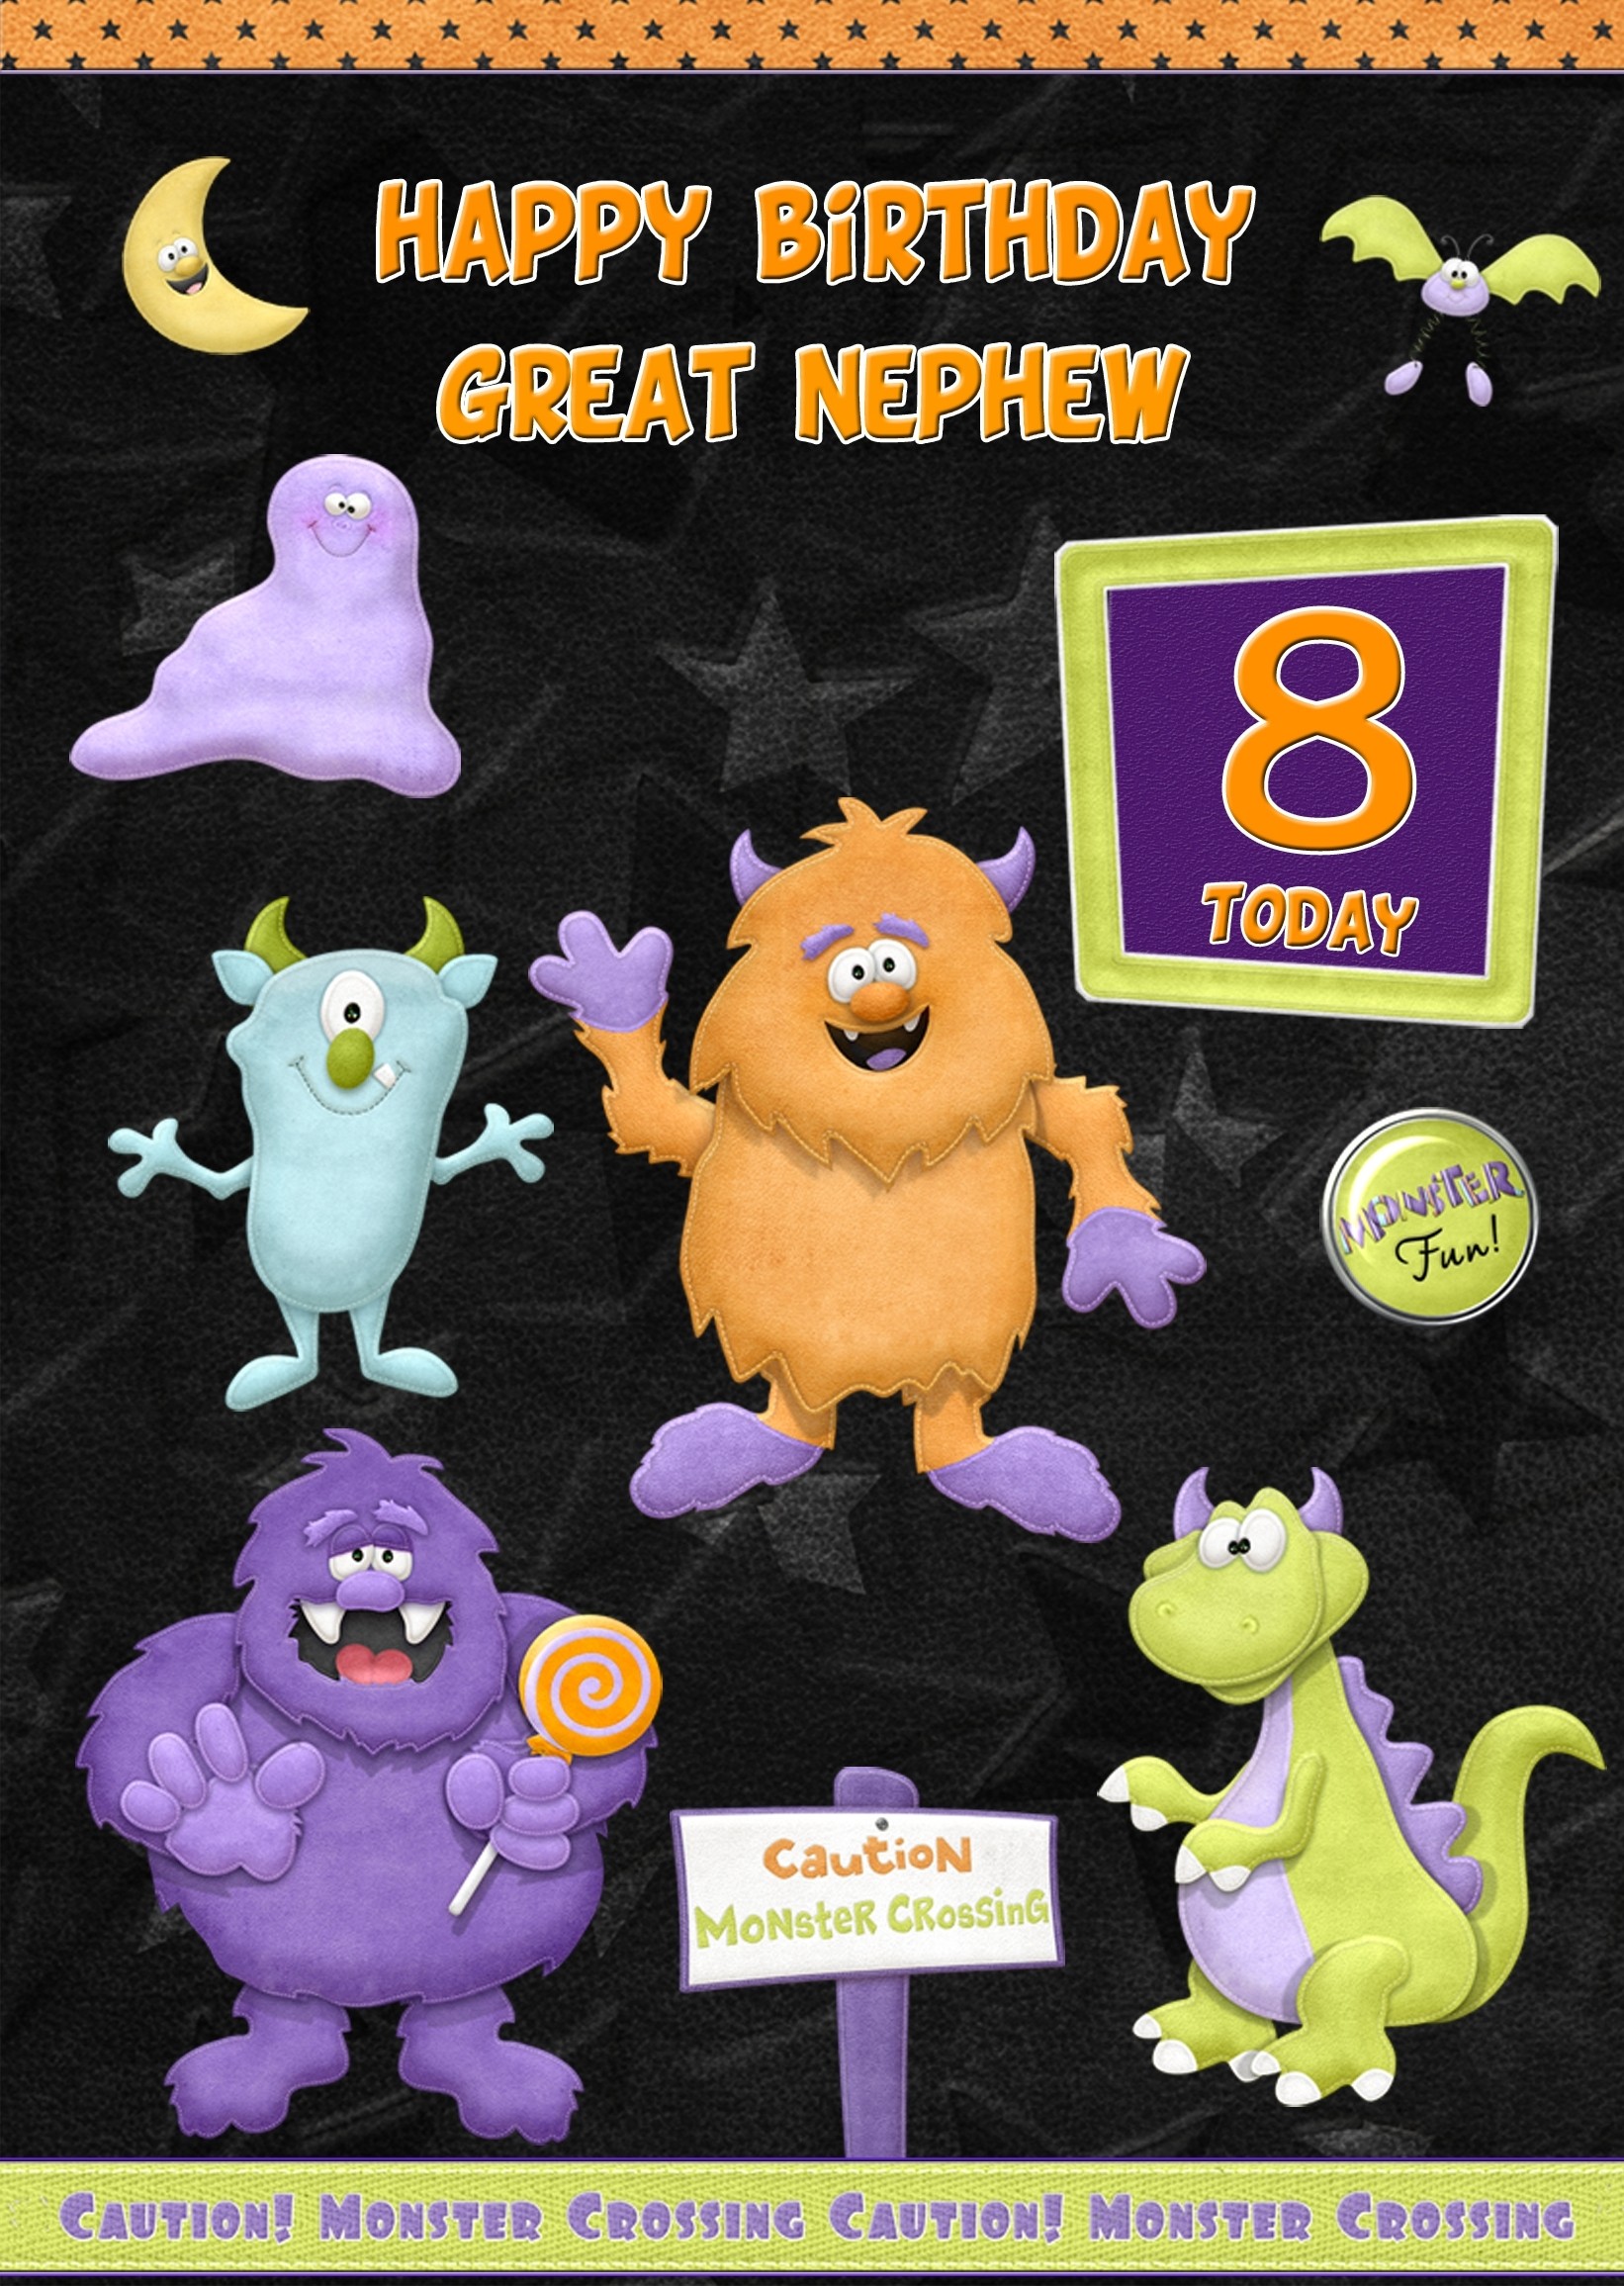 Kids 8th Birthday Funny Monster Cartoon Card for Great Nephew